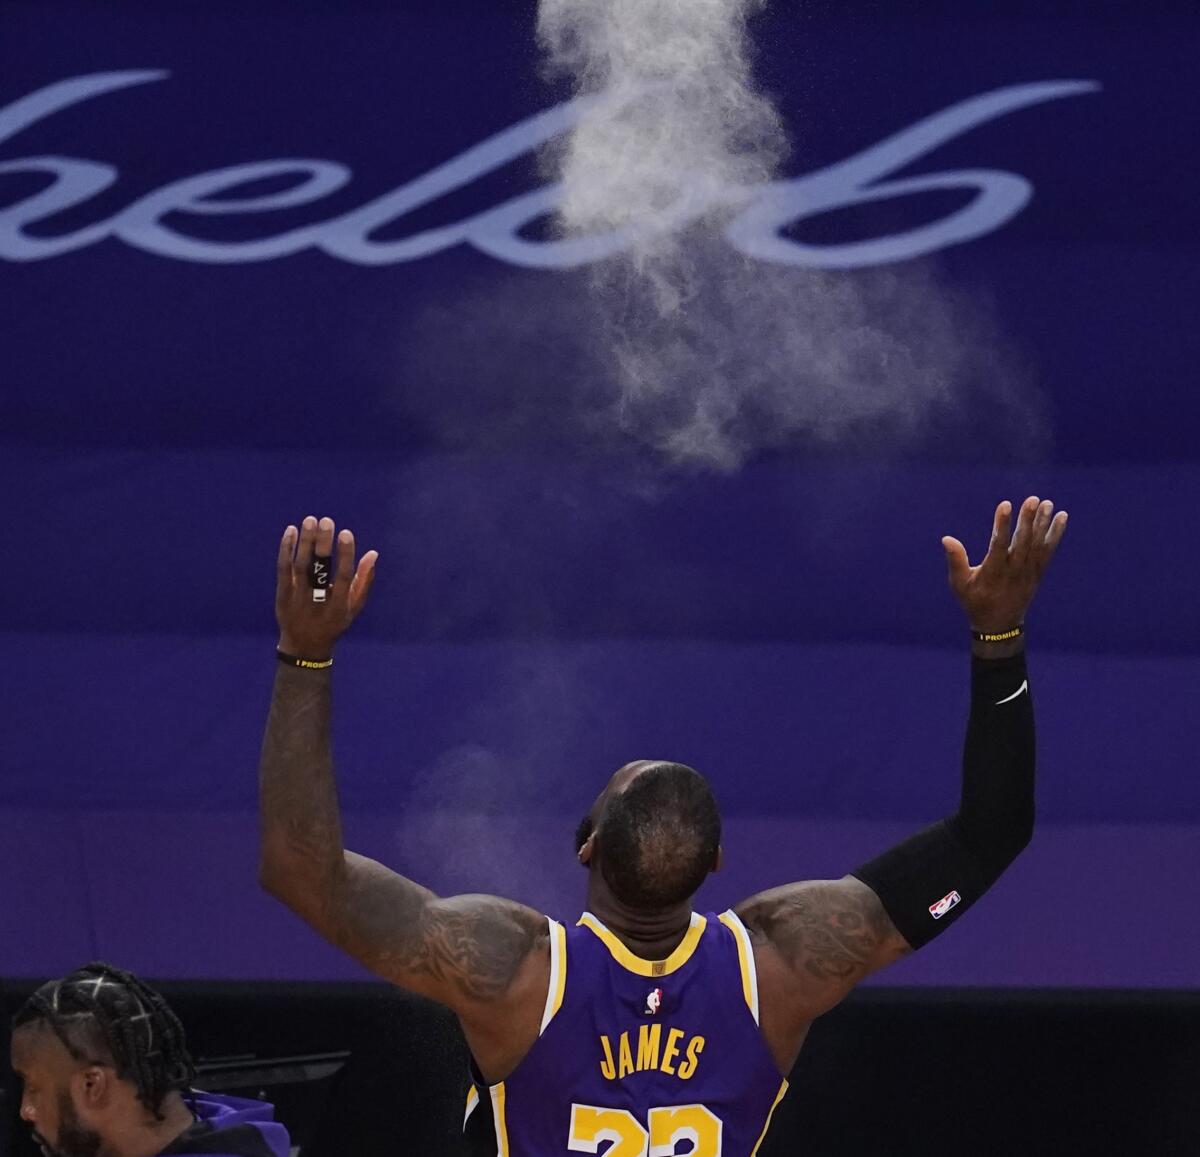 Is Lakers' LeBron James' version of The Last Dance in the works?